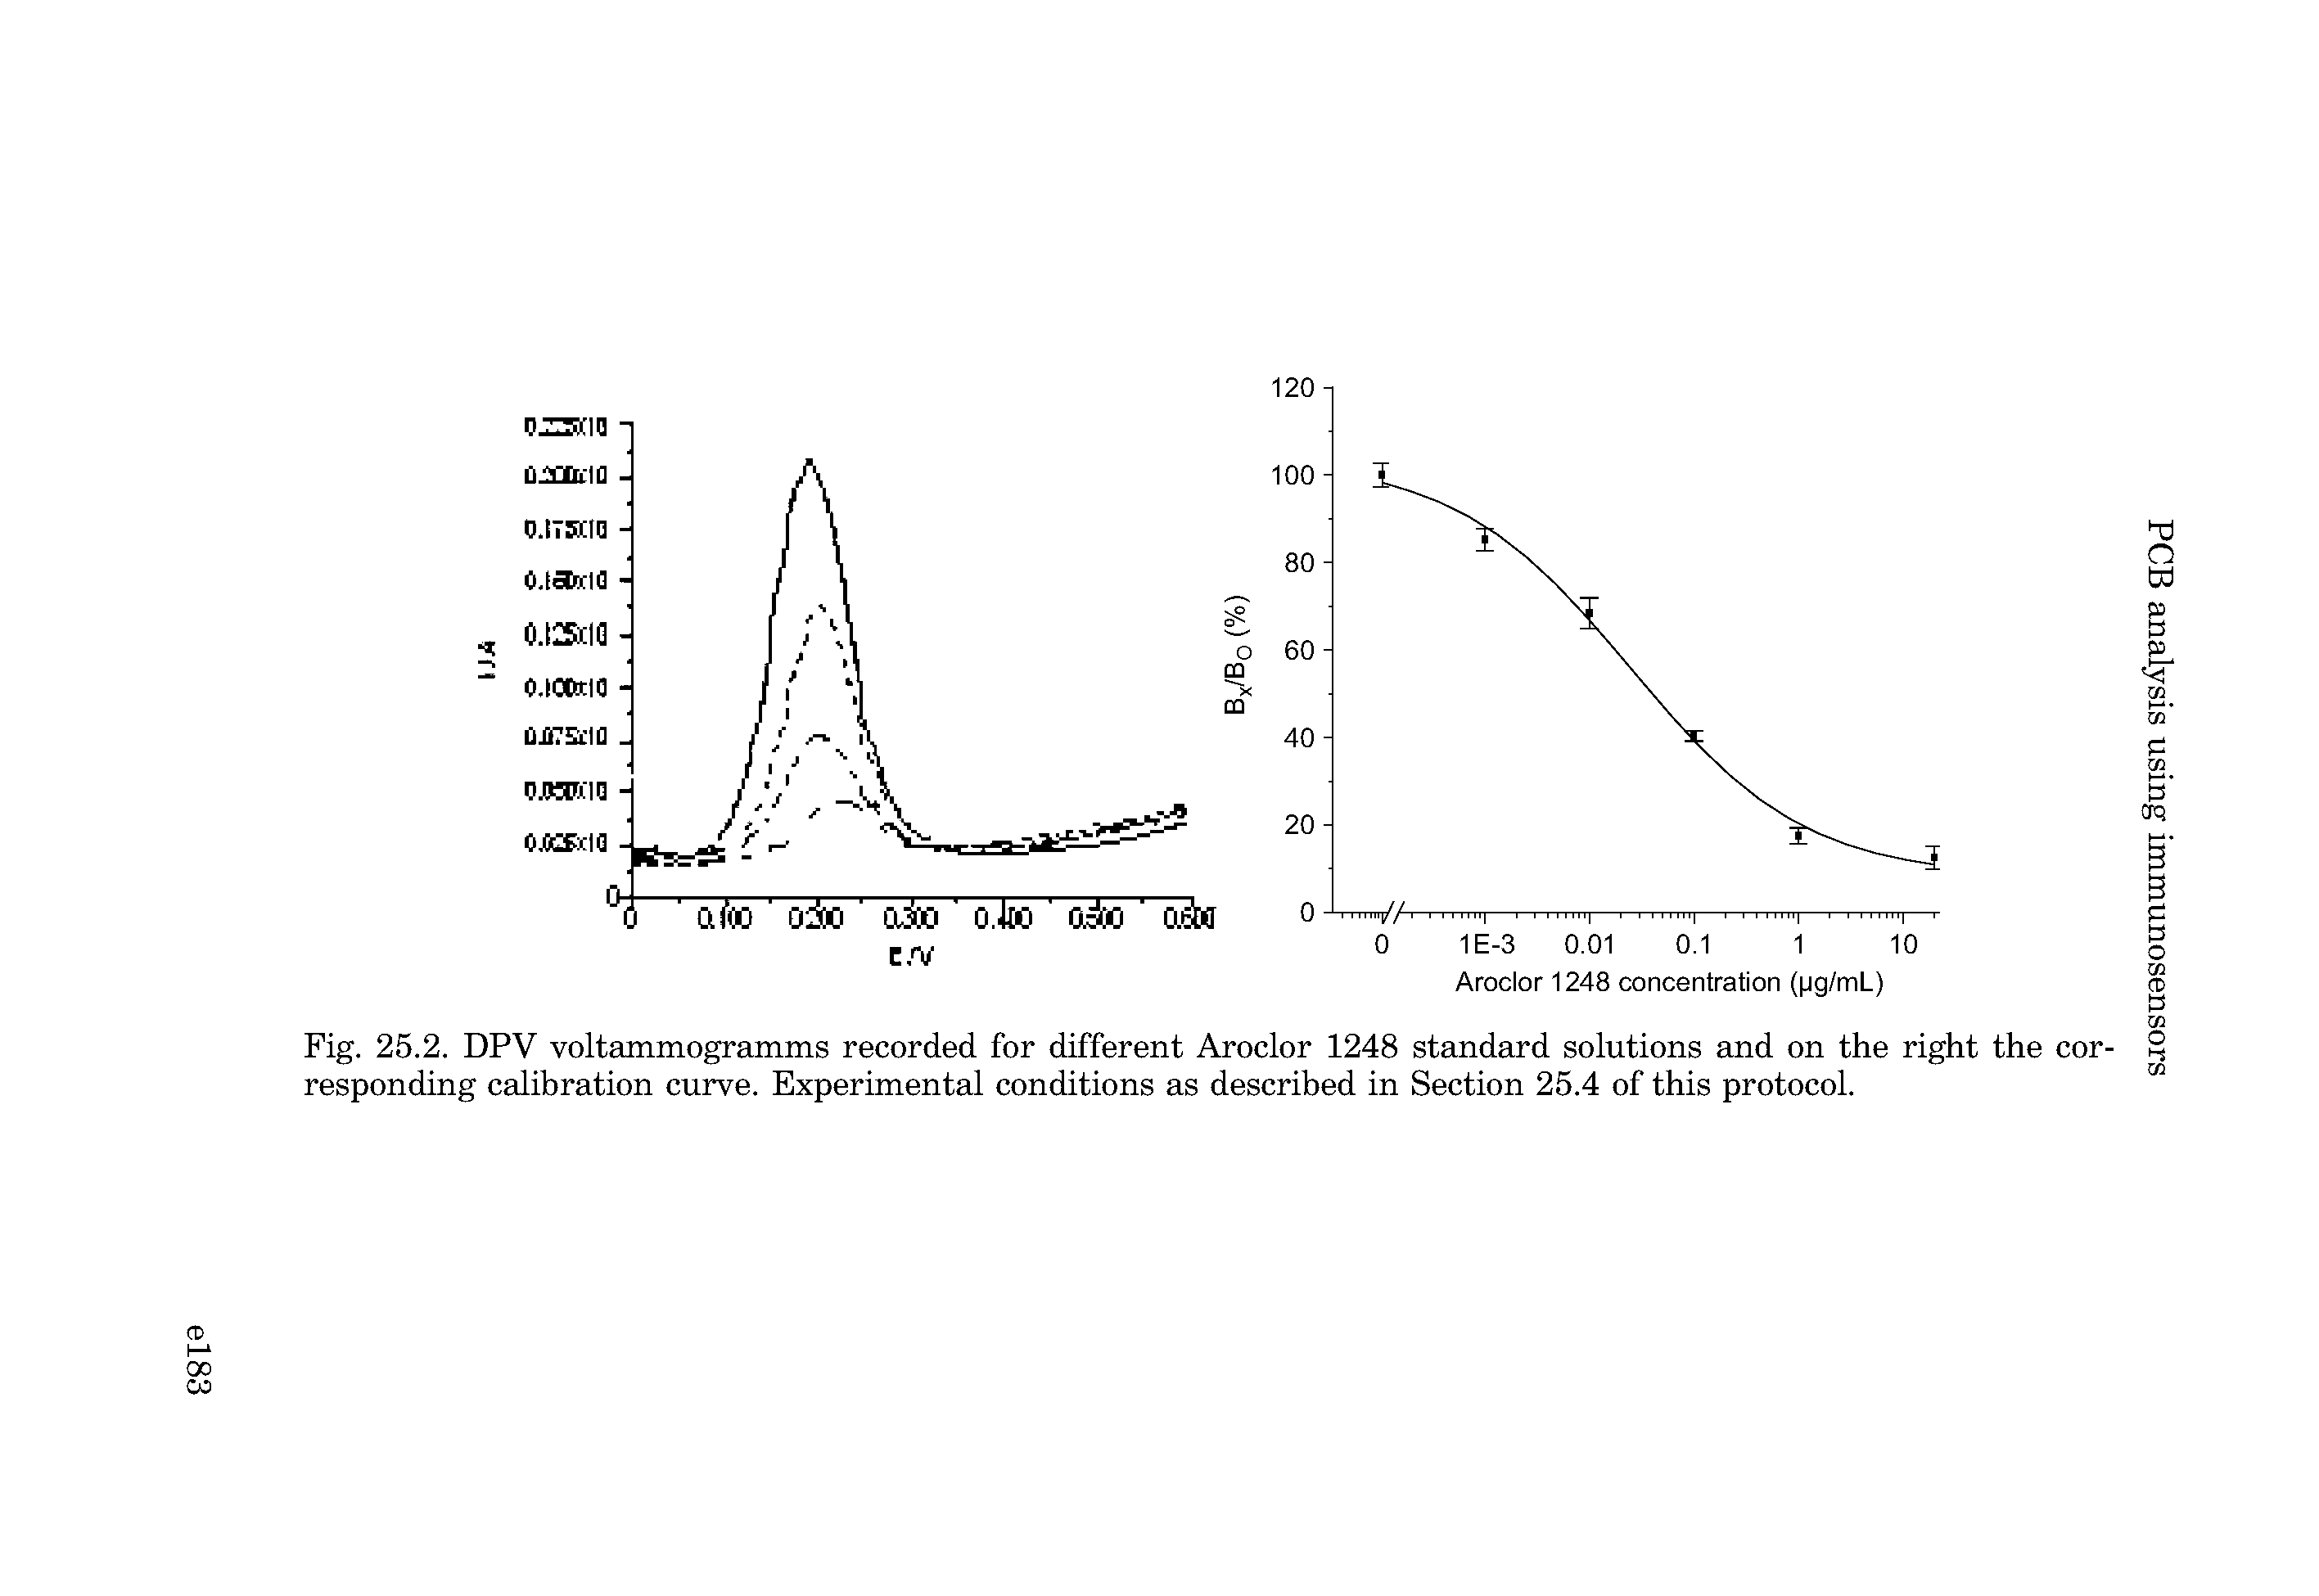 Fig. 25.2. DPV voltammogramms recorded for different Aroclor 1248 standard solutions and on the right the corresponding calibration curve. Experimental conditions as described in Section 25.4 of this protocol.